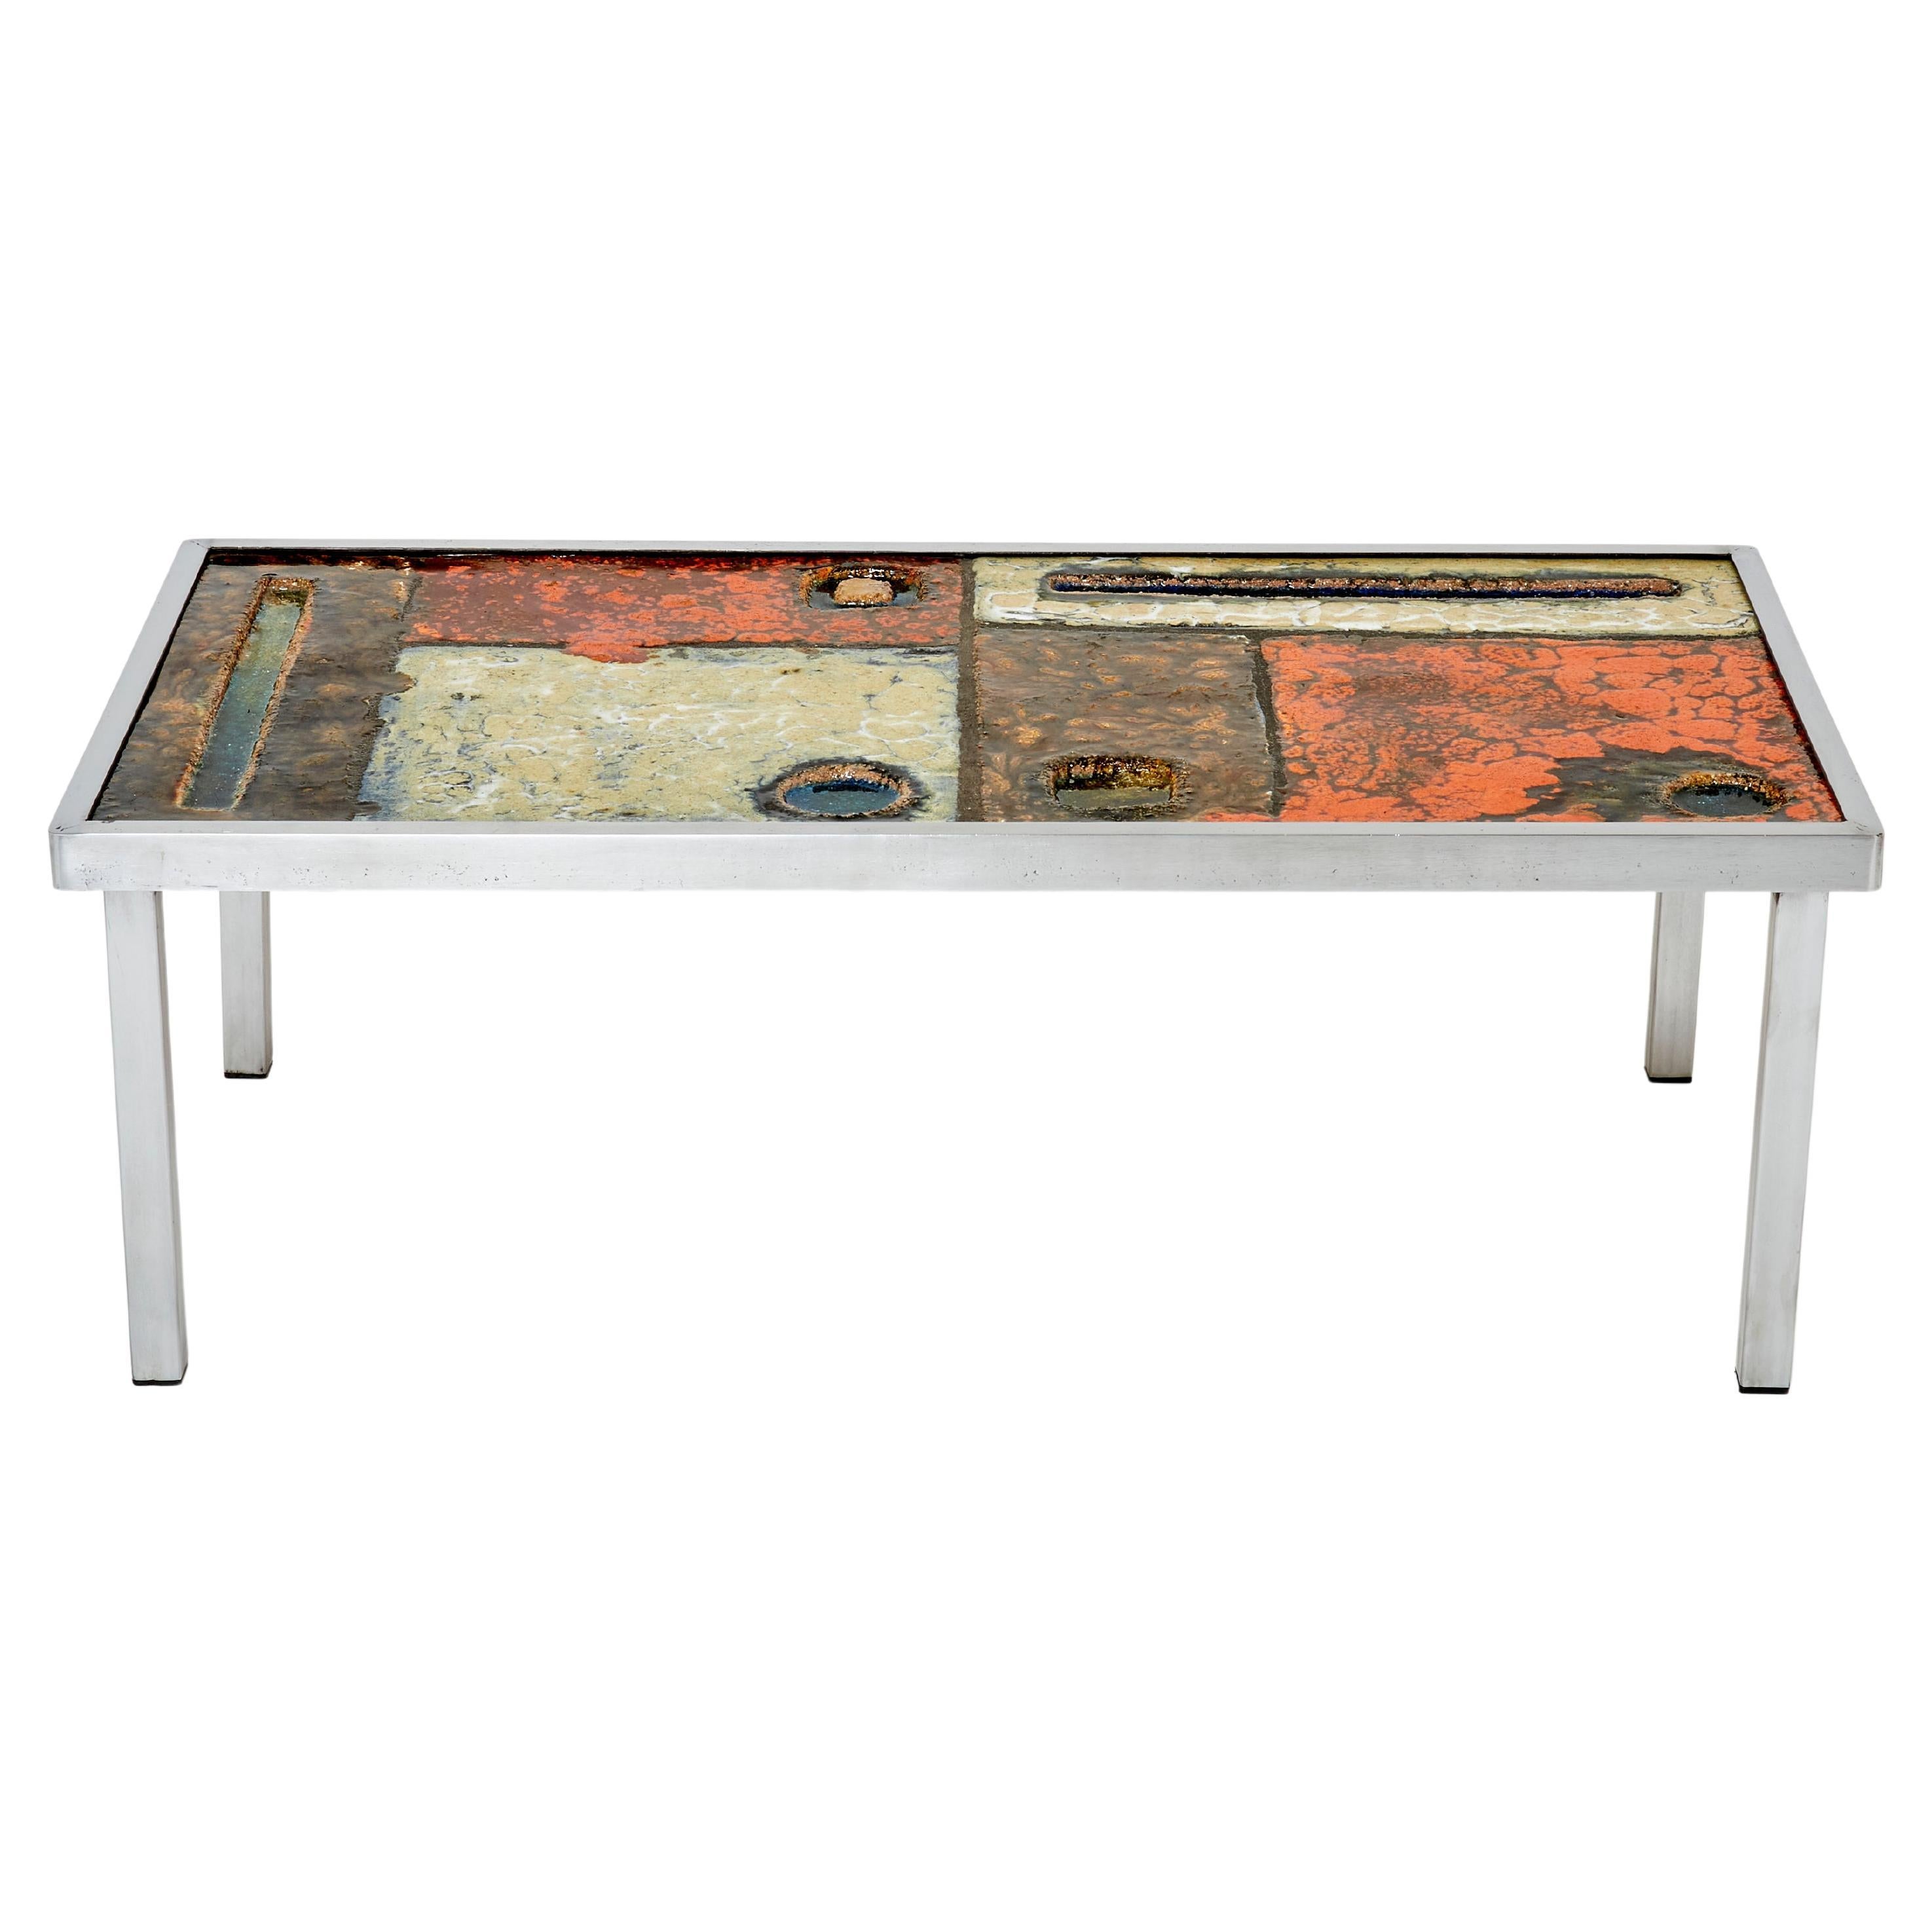 Robert and Jean Cloutier Ceramic Steel Coffee Table, 1950s For Sale